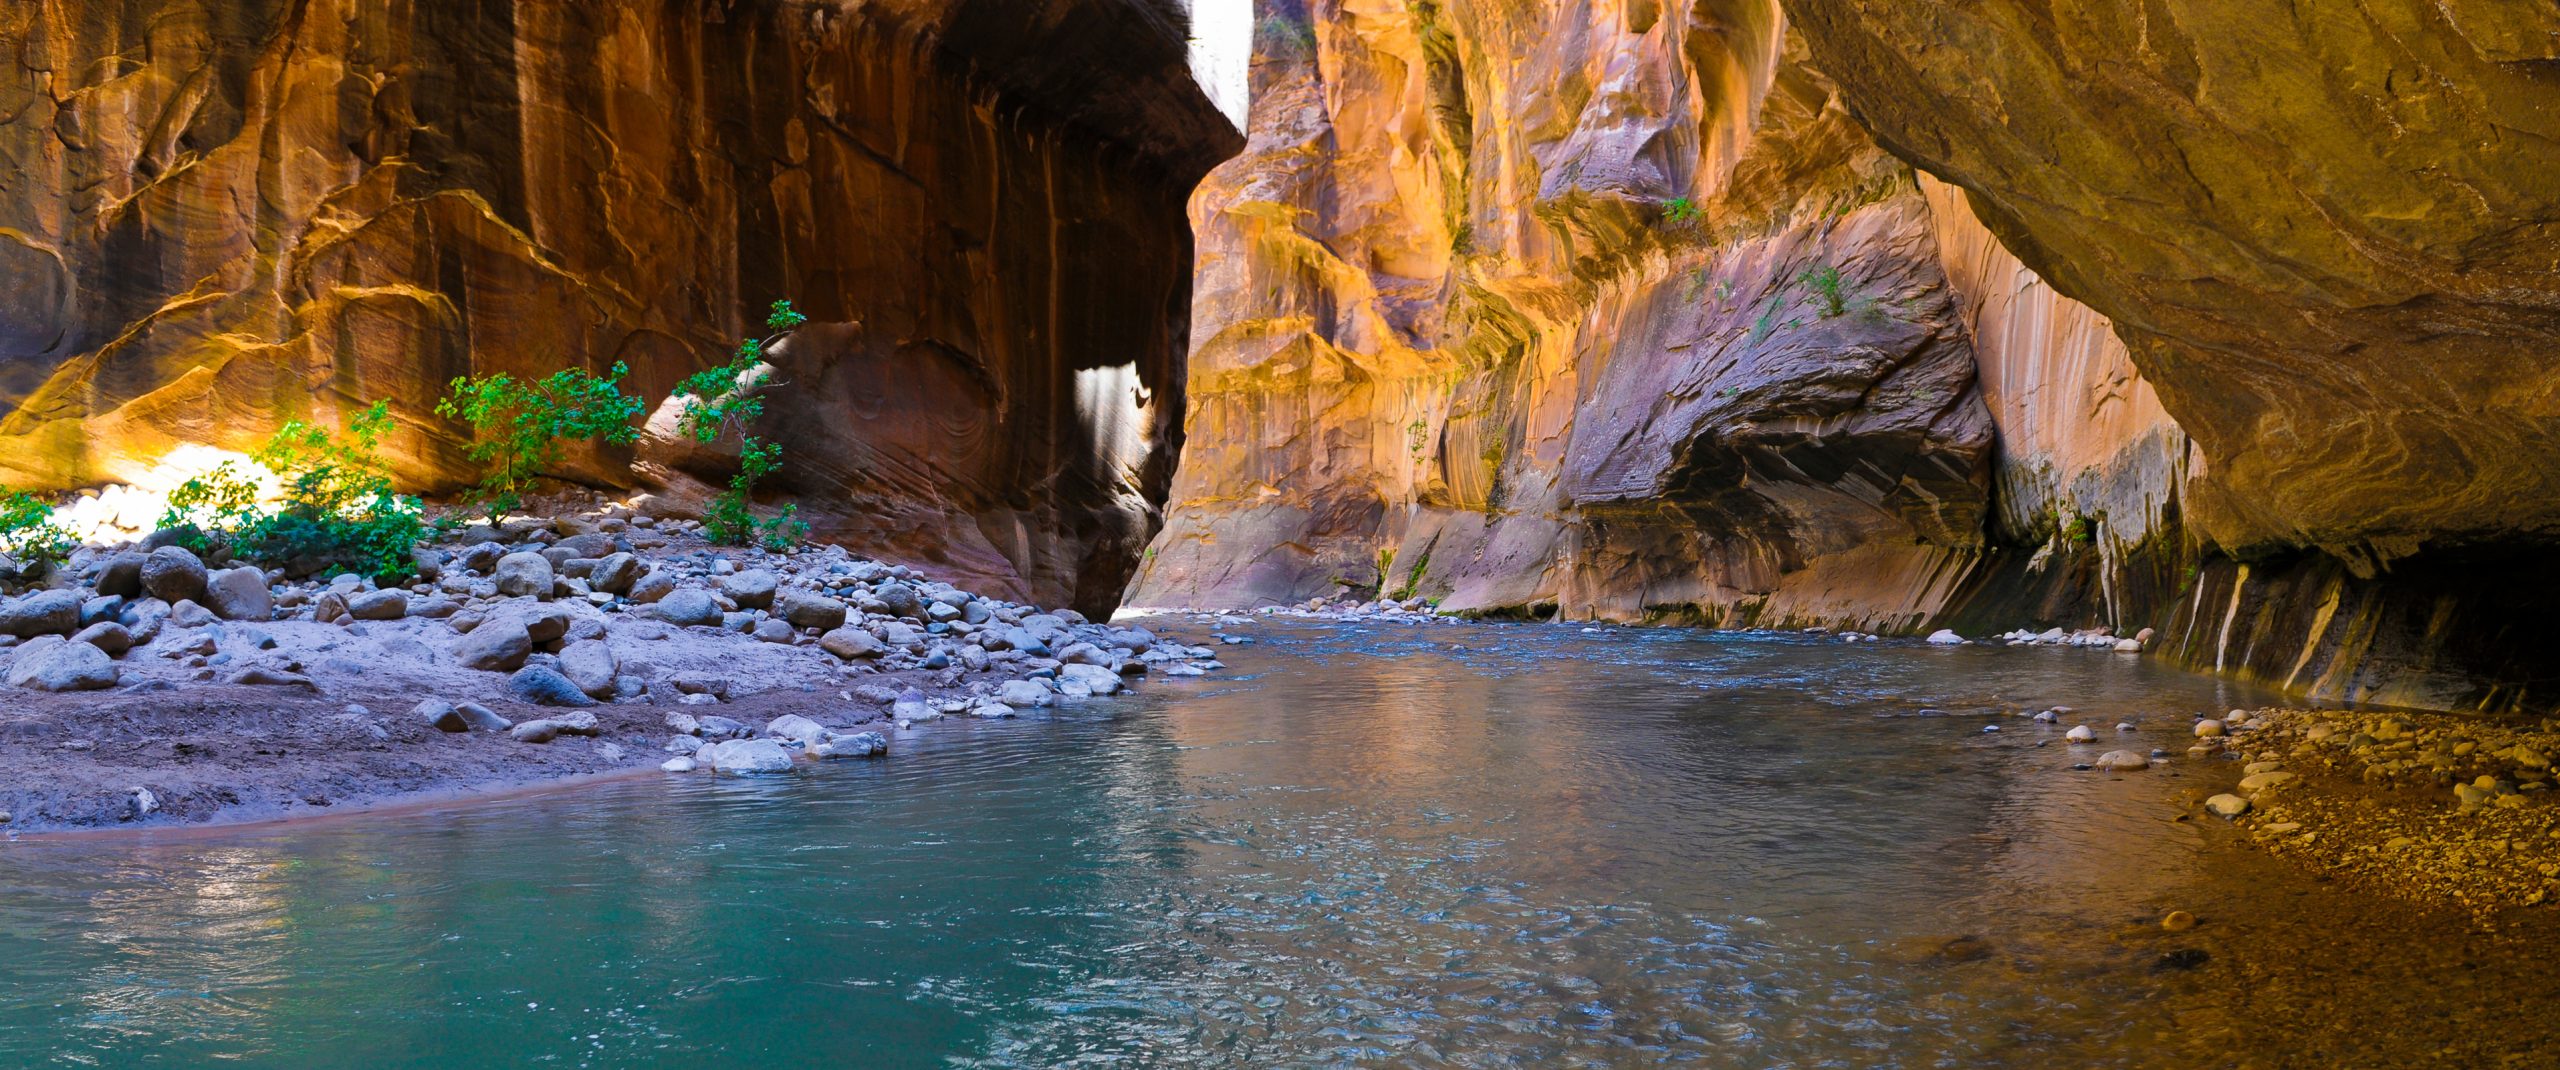 3 tips to make your trip to the Narrows amazing